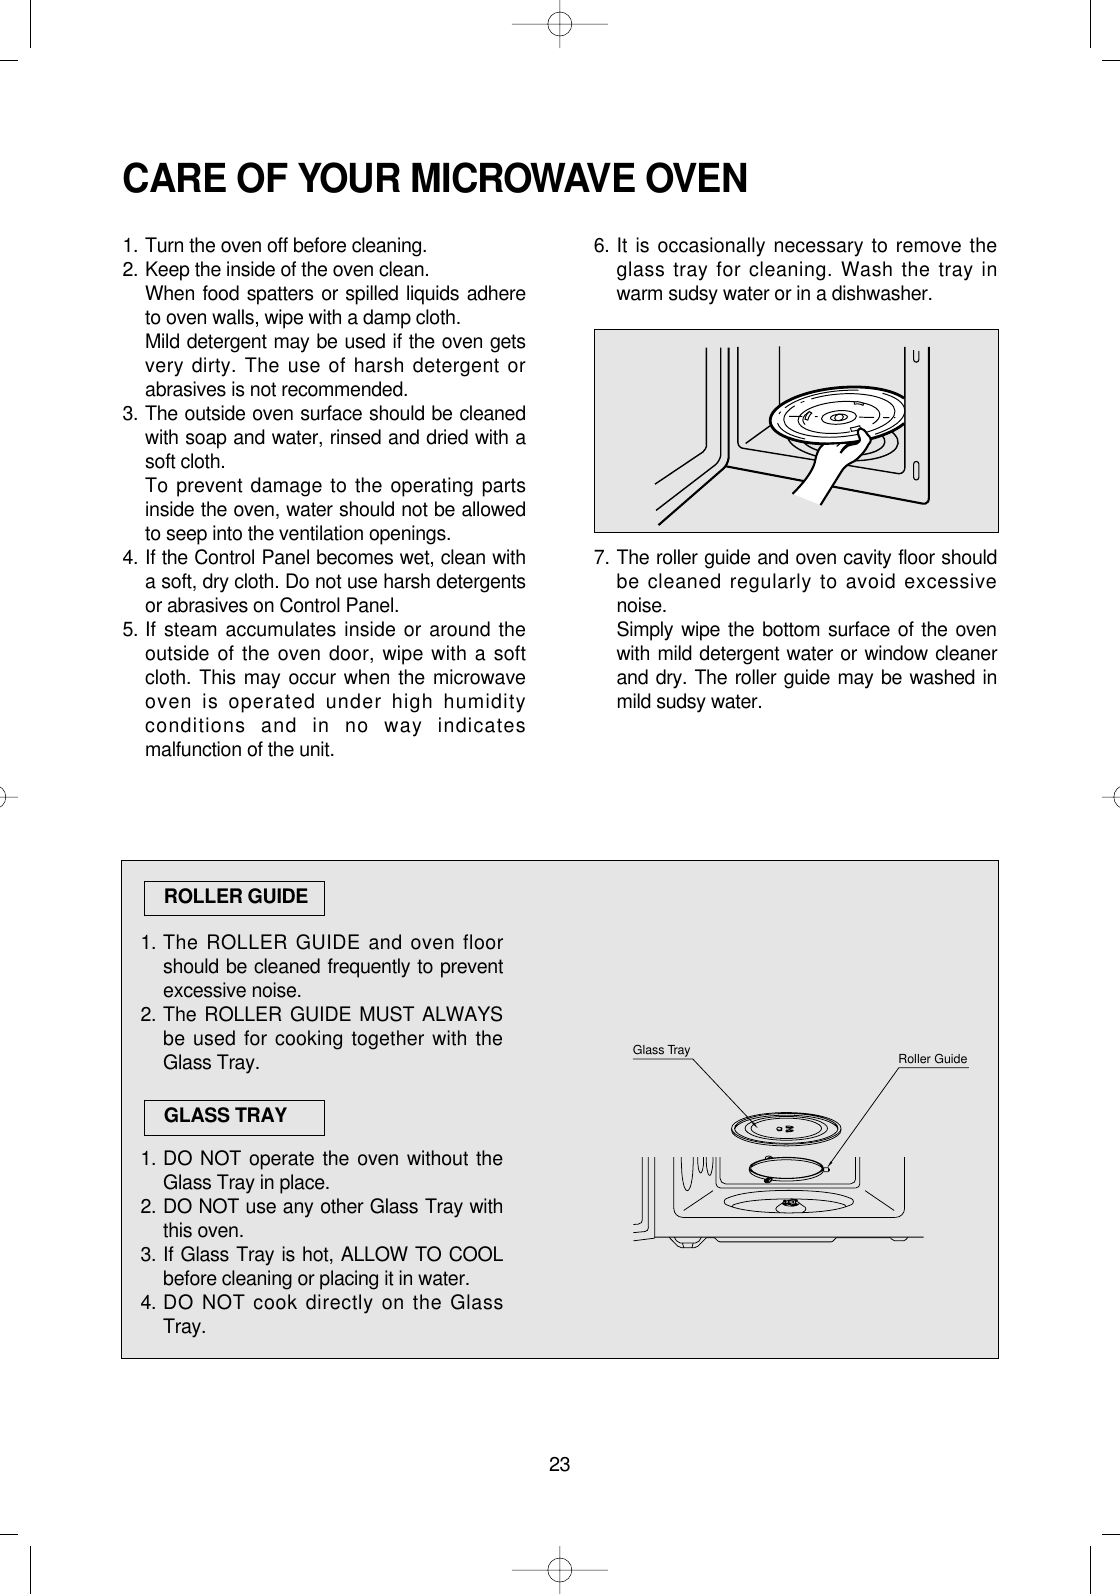 23CARE OF YOUR MICROWAVE OVEN1. Turn the oven off before cleaning.2. Keep the inside of the oven clean.When food spatters or spilled liquids adhereto oven walls, wipe with a damp cloth.Mild detergent may be used if the oven getsvery dirty. The use of harsh detergent orabrasives is not recommended.3. The outside oven surface should be cleanedwith soap and water, rinsed and dried with asoft cloth.To prevent damage to the operating partsinside the oven, water should not be allowedto seep into the ventilation openings.4. If the Control Panel becomes wet, clean witha soft, dry cloth. Do not use harsh detergentsor abrasives on Control Panel.5. If steam accumulates inside or around theoutside of the oven door, wipe with a softcloth. This may occur when the microwaveoven is operated under high humidityconditions and in no way indicatesmalfunction of the unit.6. It is occasionally necessary to remove theglass tray for cleaning. Wash the tray inwarm sudsy water or in a dishwasher.7. The roller guide and oven cavity floor shouldbe cleaned regularly to avoid excessivenoise. Simply wipe the bottom surface of the ovenwith mild detergent water or window cleanerand dry. The roller guide may be washed inmild sudsy water.1. The ROLLER GUIDE and oven floorshould be cleaned frequently to preventexcessive noise.2. The ROLLER GUIDE MUST ALWAYSbe used for cooking together with theGlass Tray.1. DO NOT operate the oven without theGlass Tray in place.2. DO NOT use any other Glass Tray withthis oven.3. If Glass Tray is hot, ALLOW TO COOLbefore cleaning or placing it in water.4. DO NOT cook directly on the GlassTray.ROLLER GUIDEGLASS TRAYRoller GuideGlass Tray 